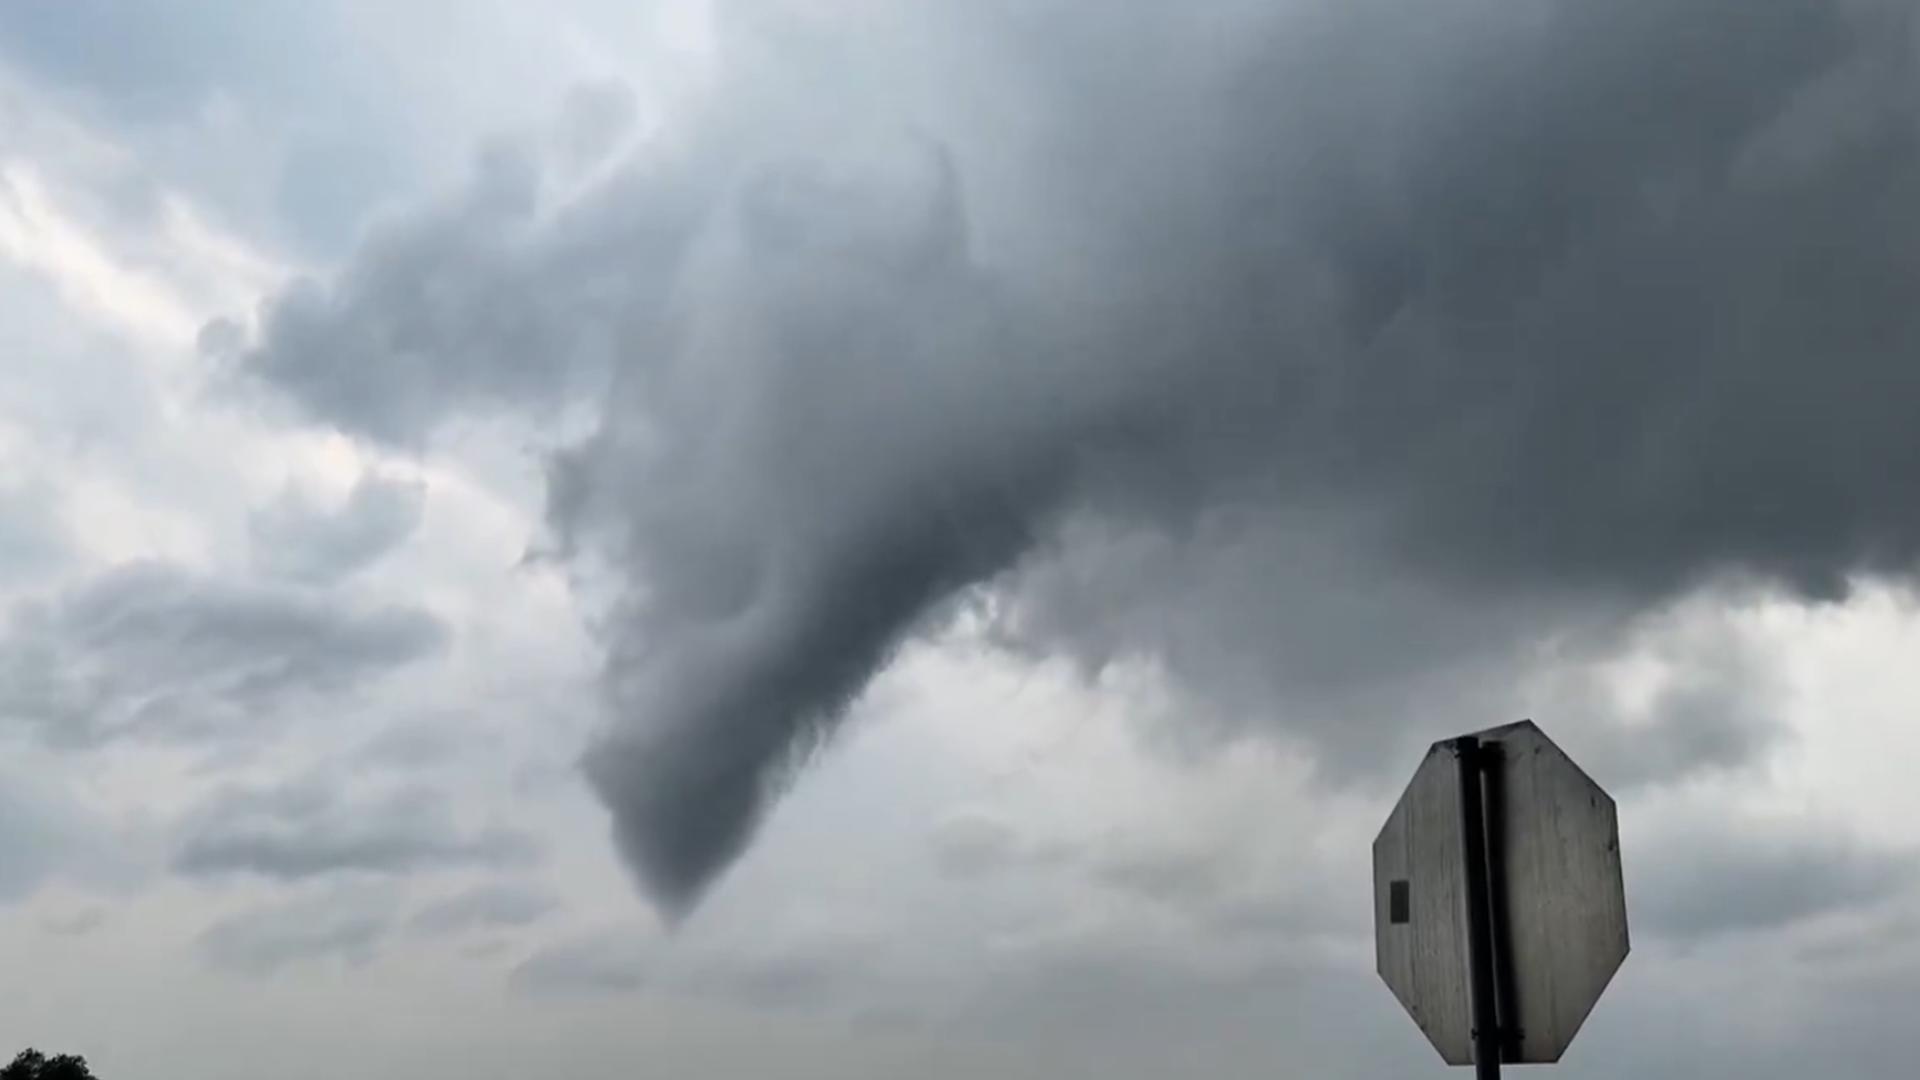 Mark Overbeck shared this video on X (@Mrk_WX) of a funnel cloud that formed, then disappeared in Chilton on Thursday, May 23.